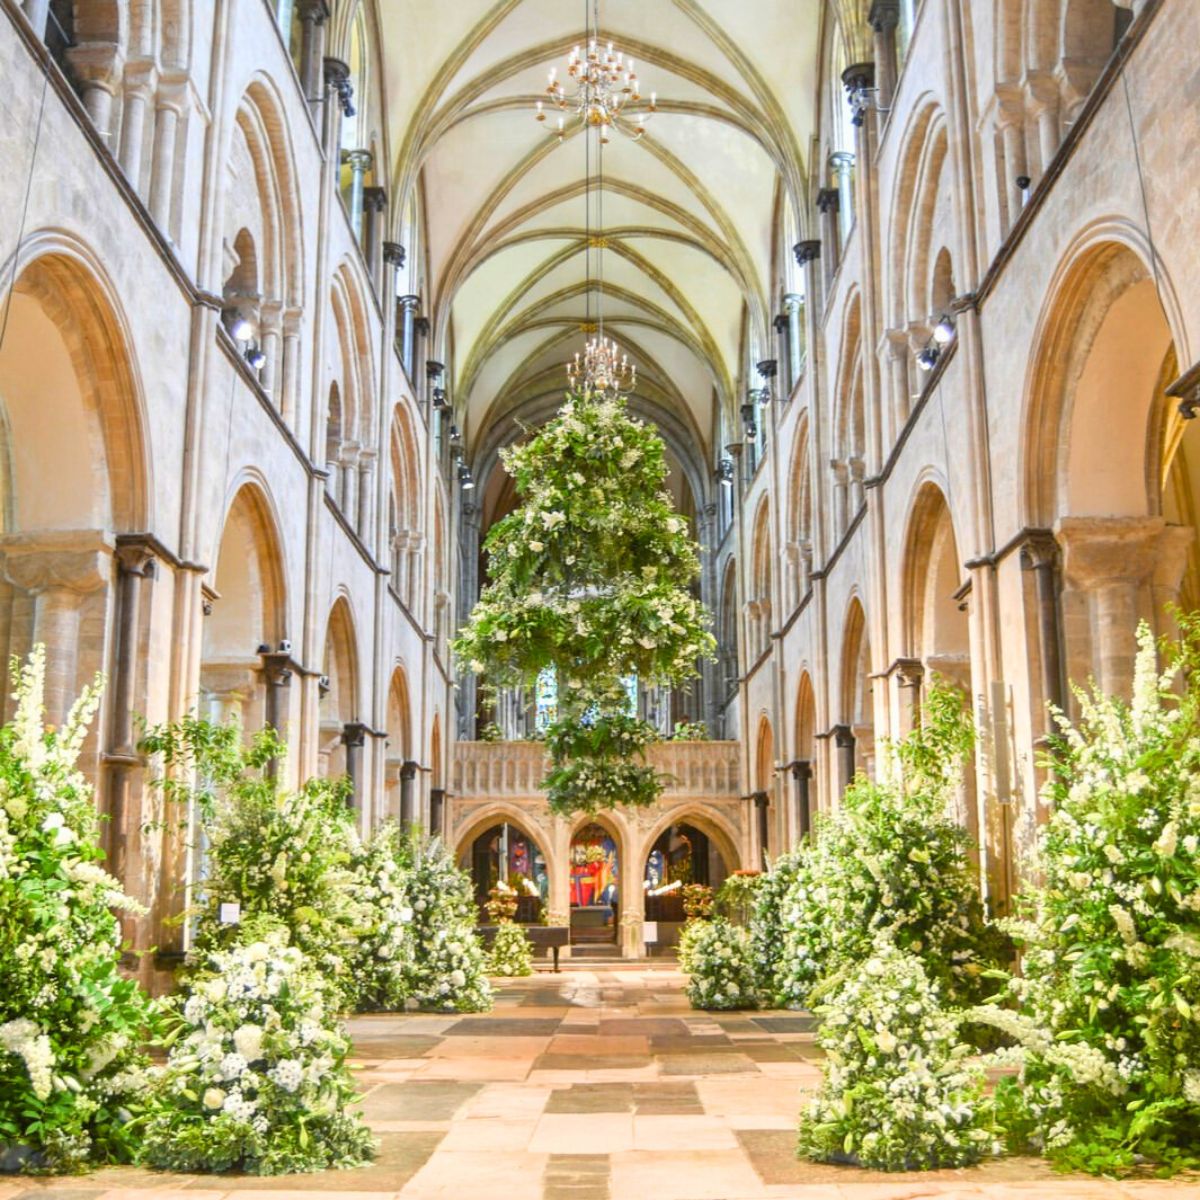 Chichester Cathedral adorned with greenery and flowers